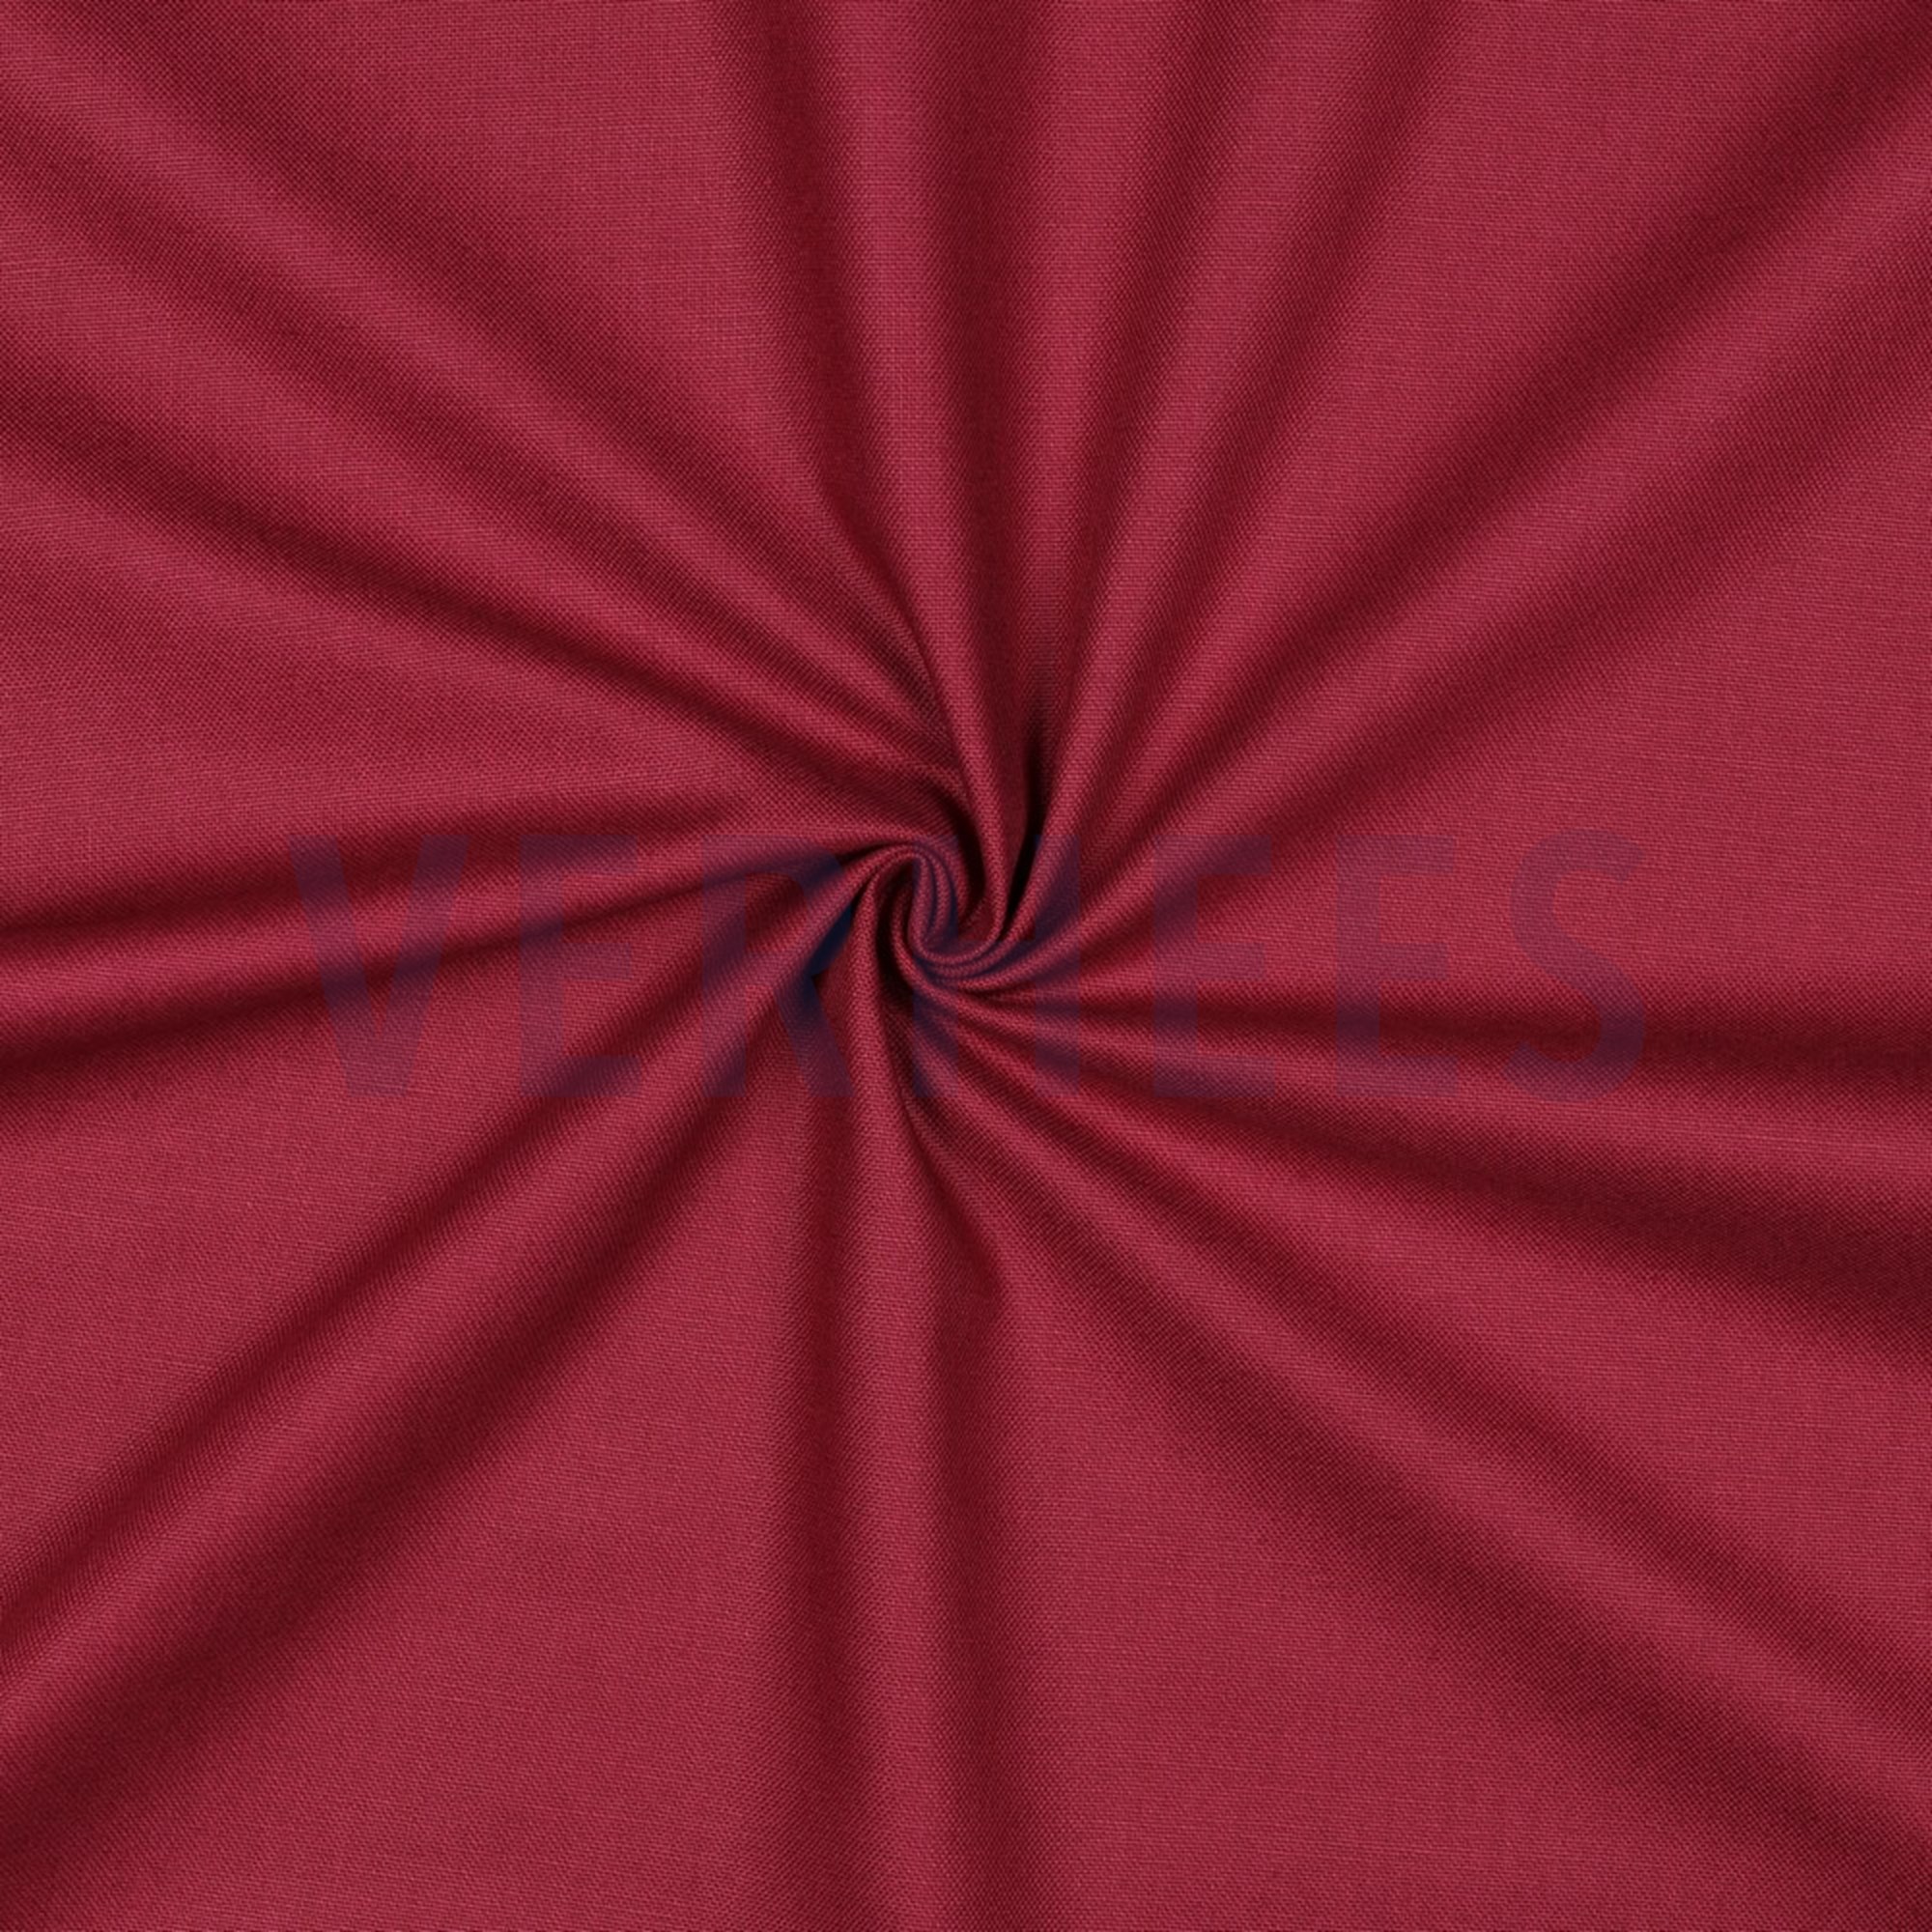 CANVAS BEET RED (high resolution) #3